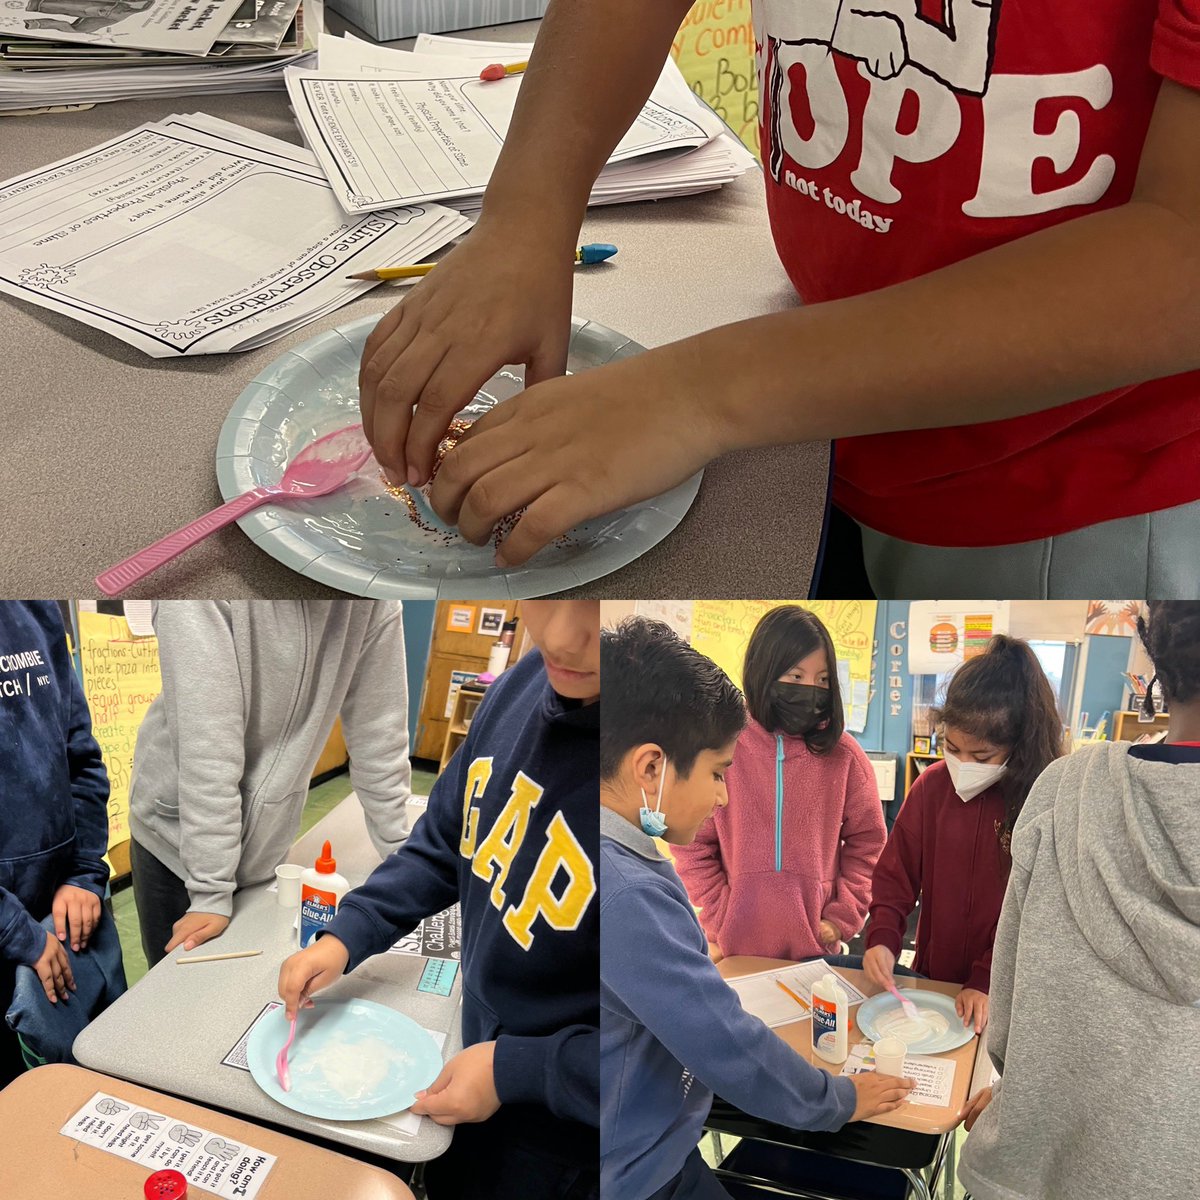 Today during #STEM class 407 had so much fun creating slime and observing the properties of slime.We learned that slime is a polymer which means it has characteristics of both solids and liquids. @PS10FortHill #PropertiesOfMatter #SLIME #Collaborate #YouHaveAFriendAtPS10